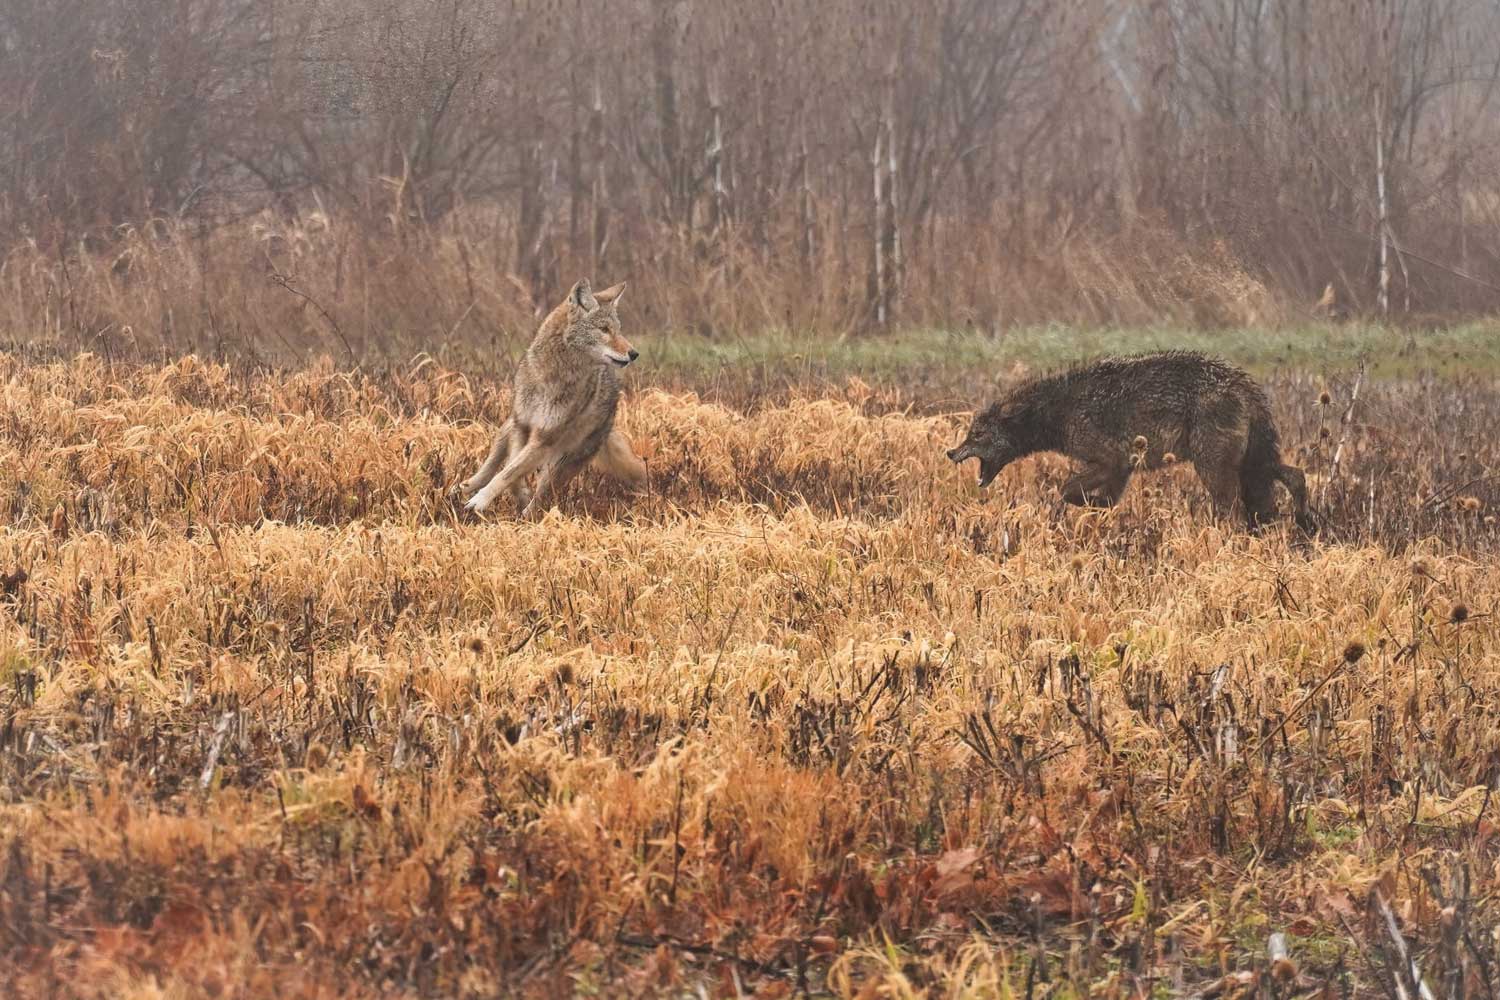 Two coyotes fighting in a field.